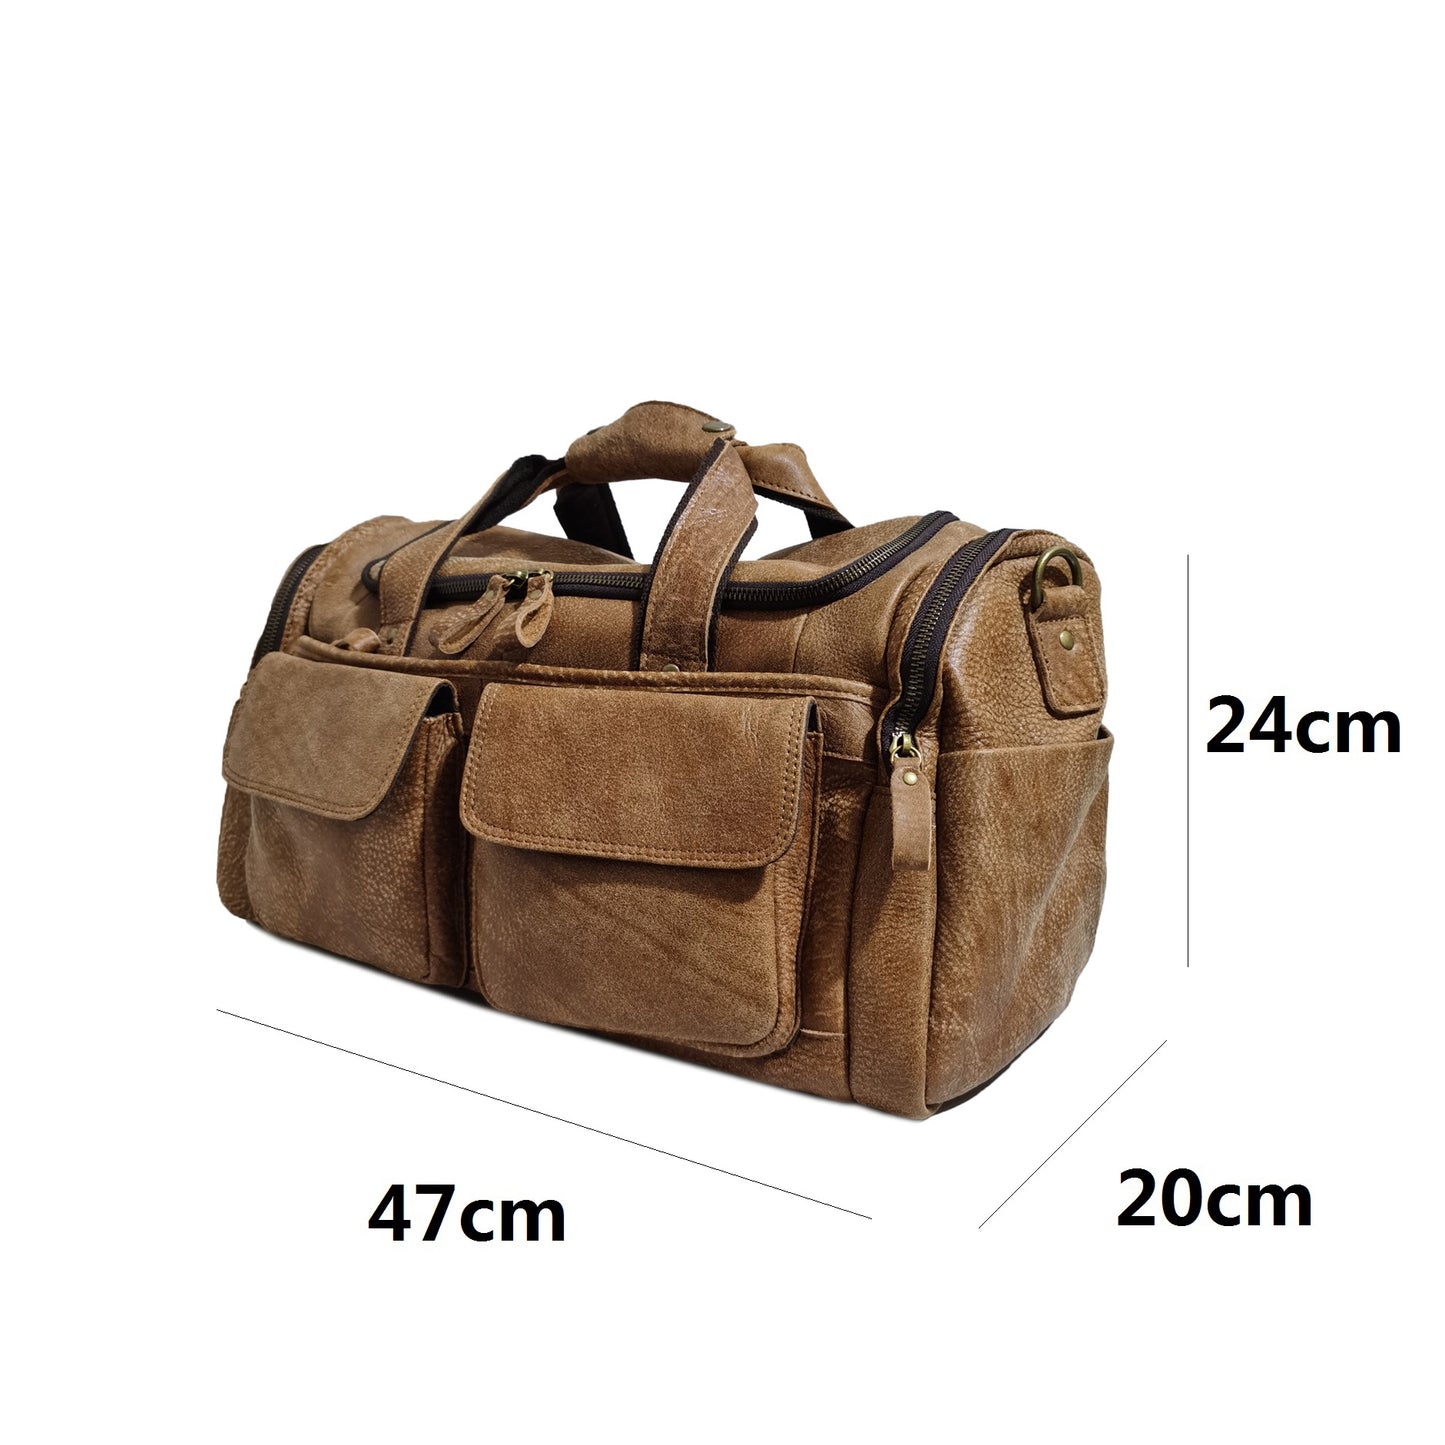 Unisex Women's and Men's genuine cowhide leather duffel travel bag Poches duffel design